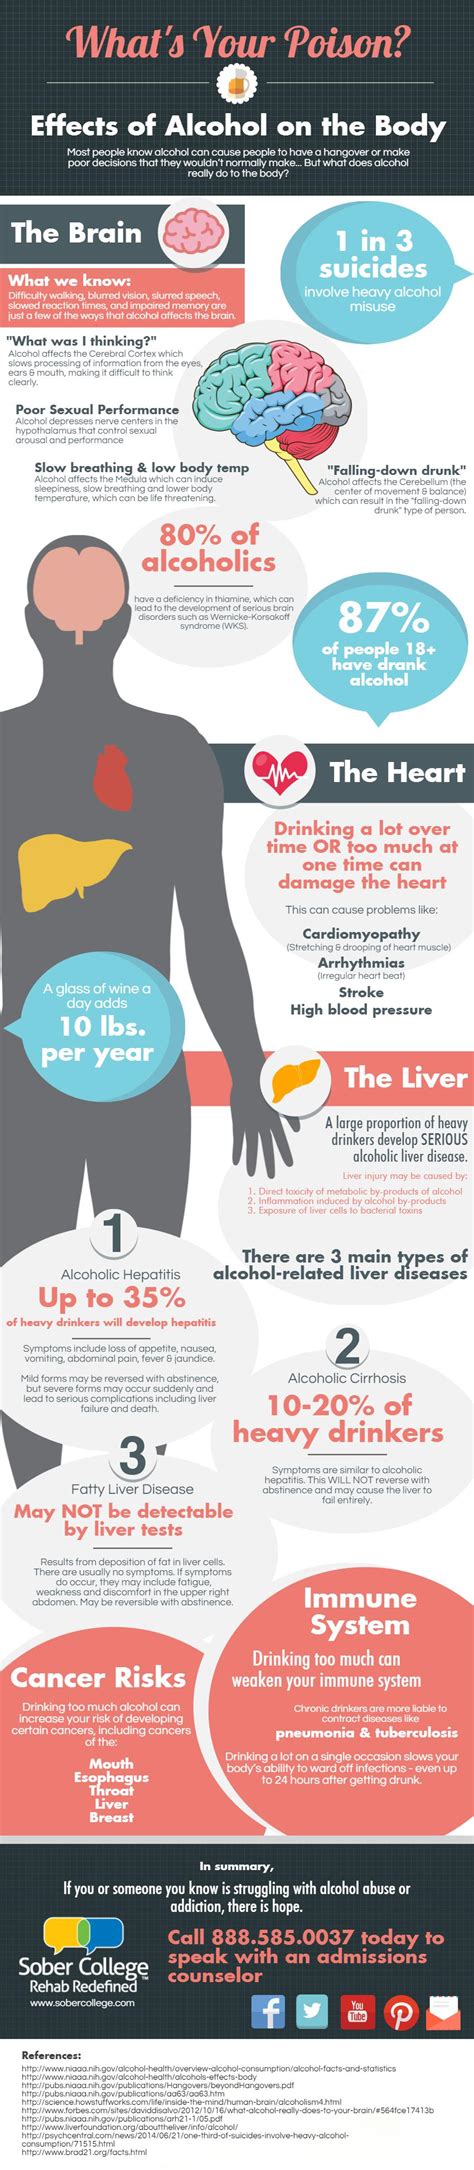 Effects Of Alcohol On The Body Infographic Sober College